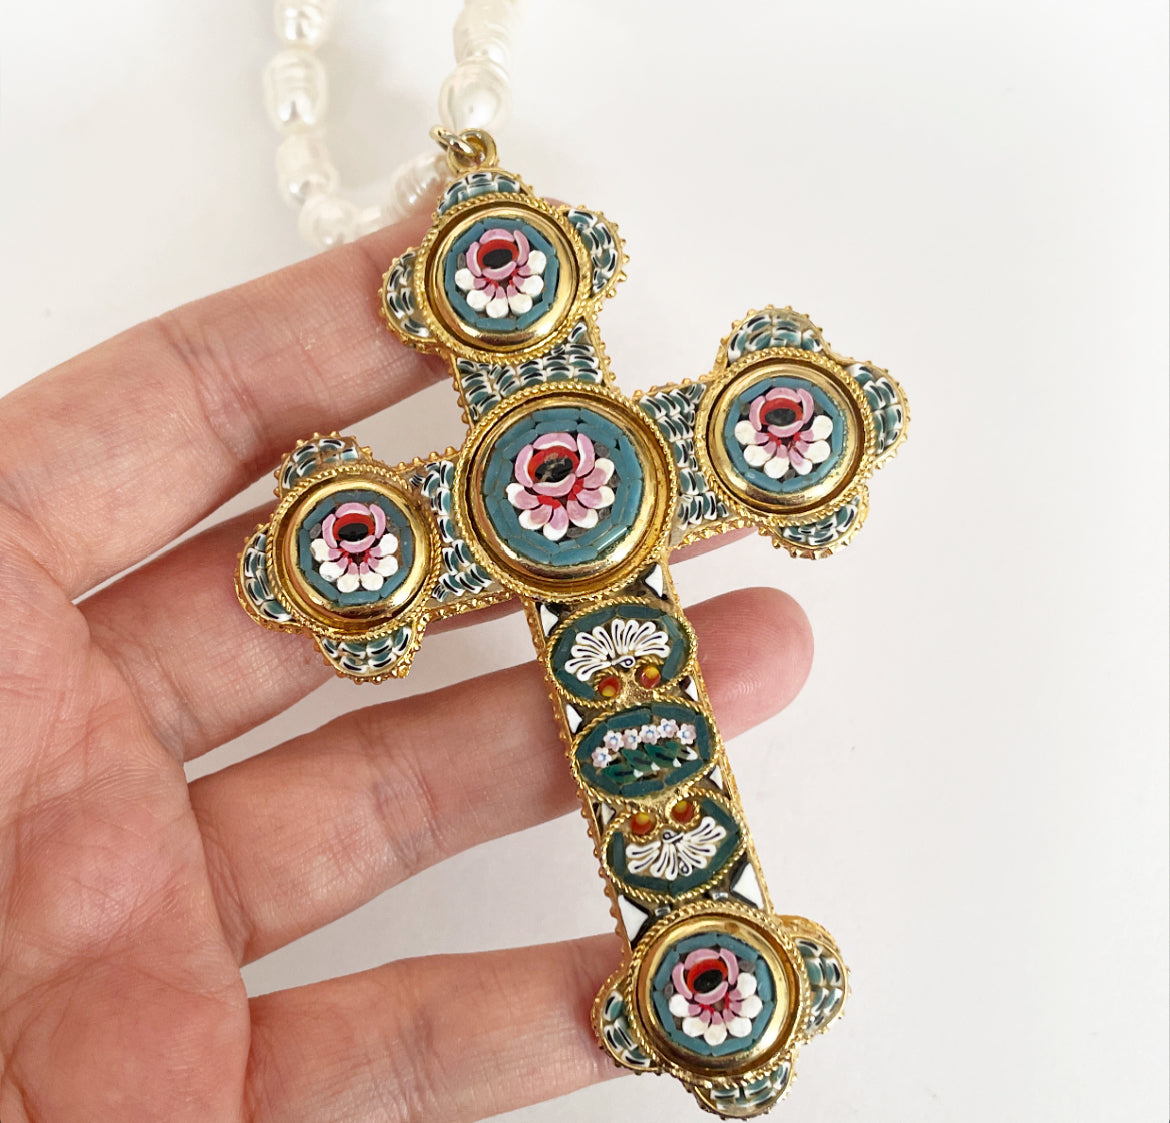 Dreamy pieces micro mosaic cross necklace